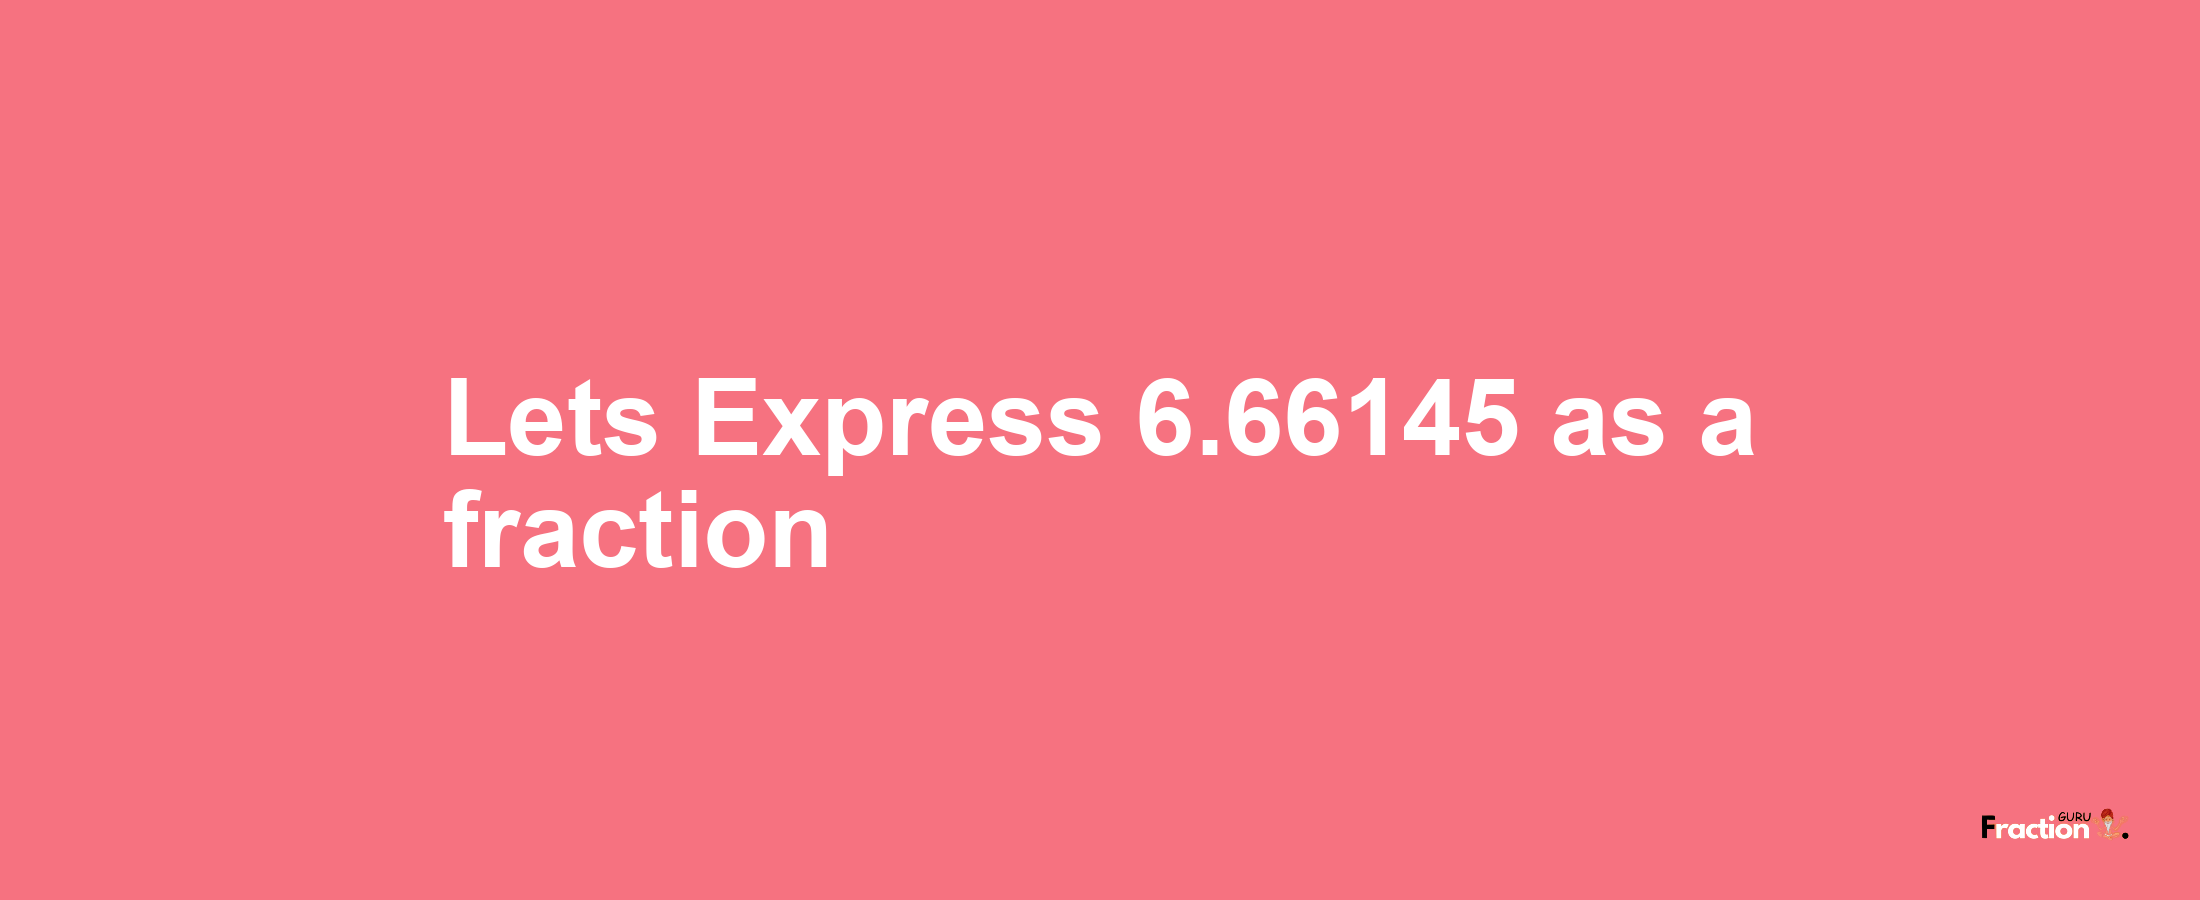 Lets Express 6.66145 as afraction